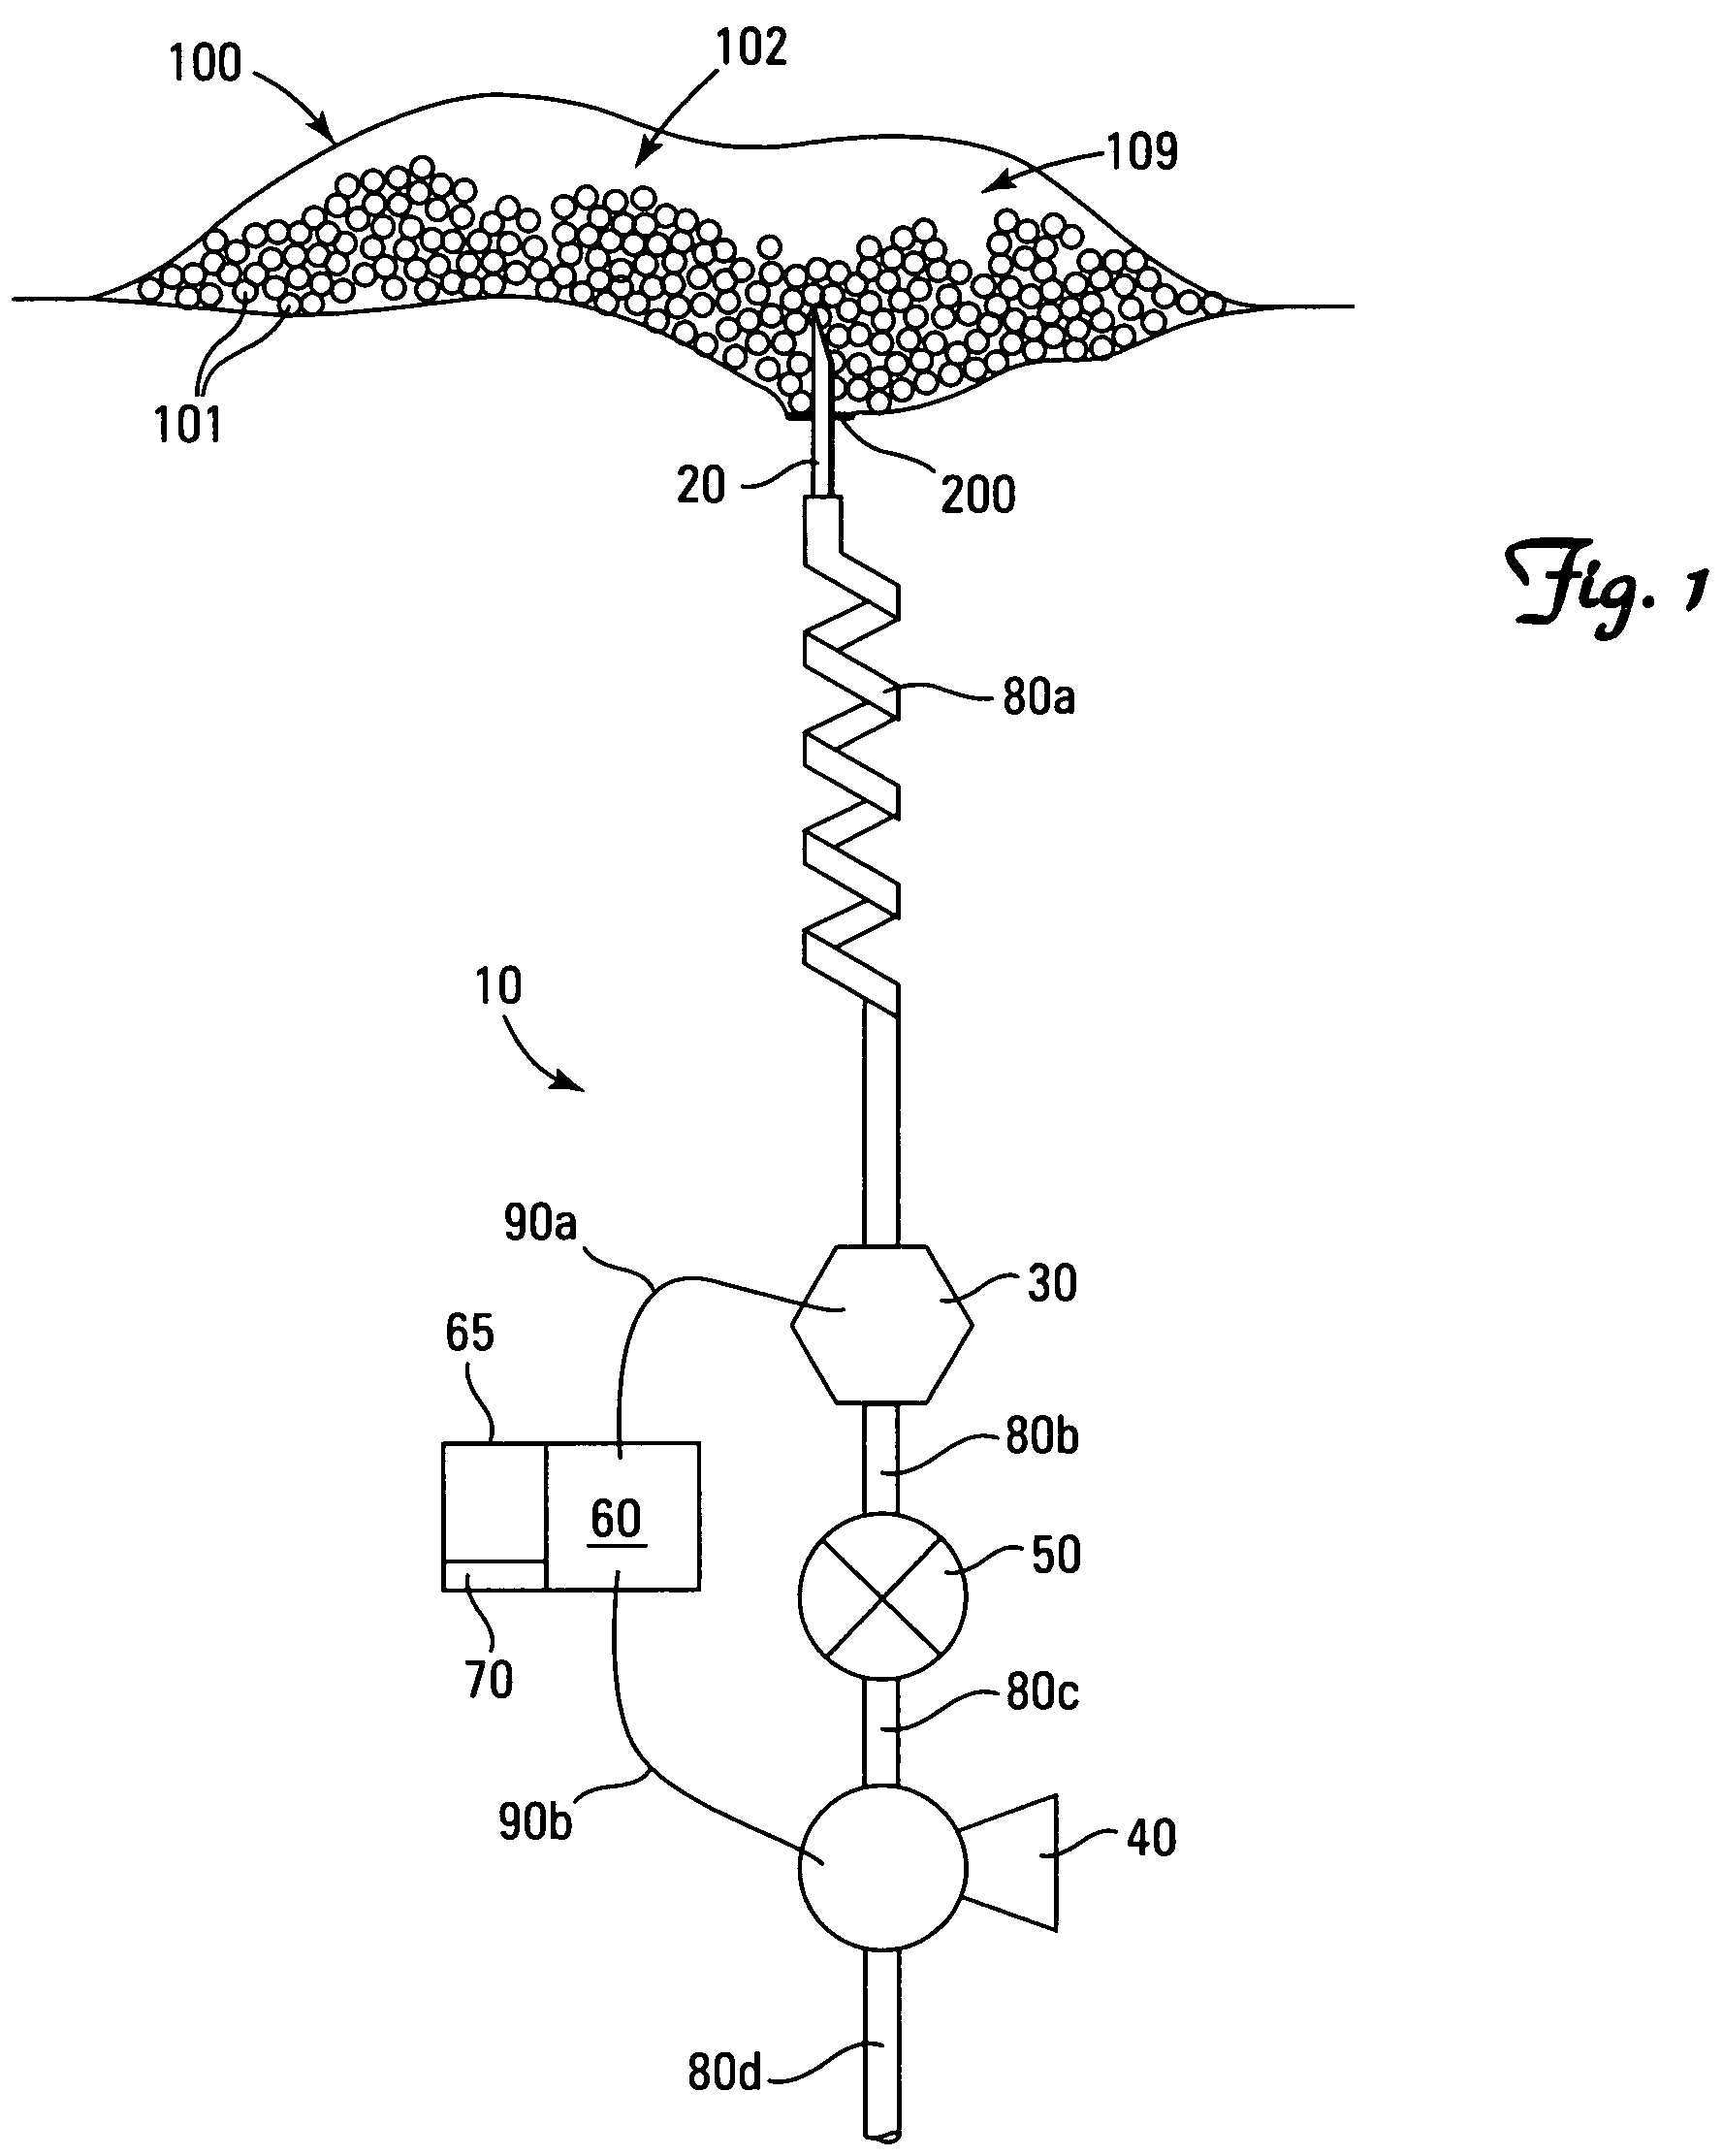 Instrument for accurately measuring mass flow rate of a fluid pumped from a hermetically sealed container